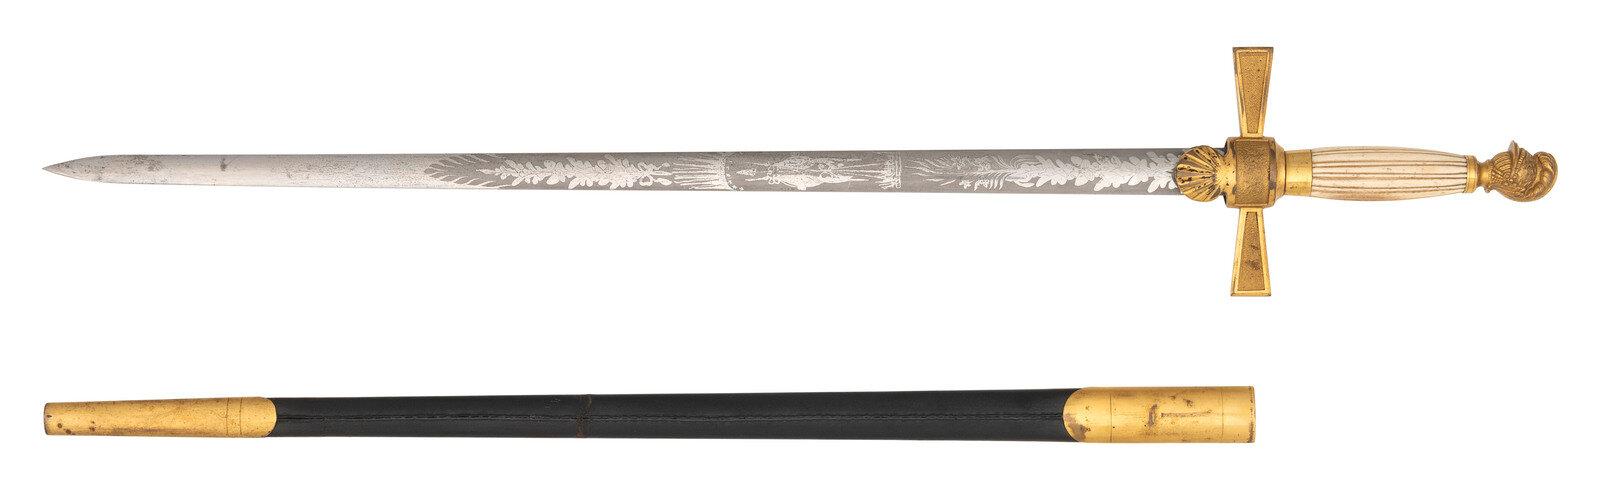 Ames Knight's Head Militia Style Sword Presented to 1st Sergeant (Lt.) Henry Parker - KIA at Resaca